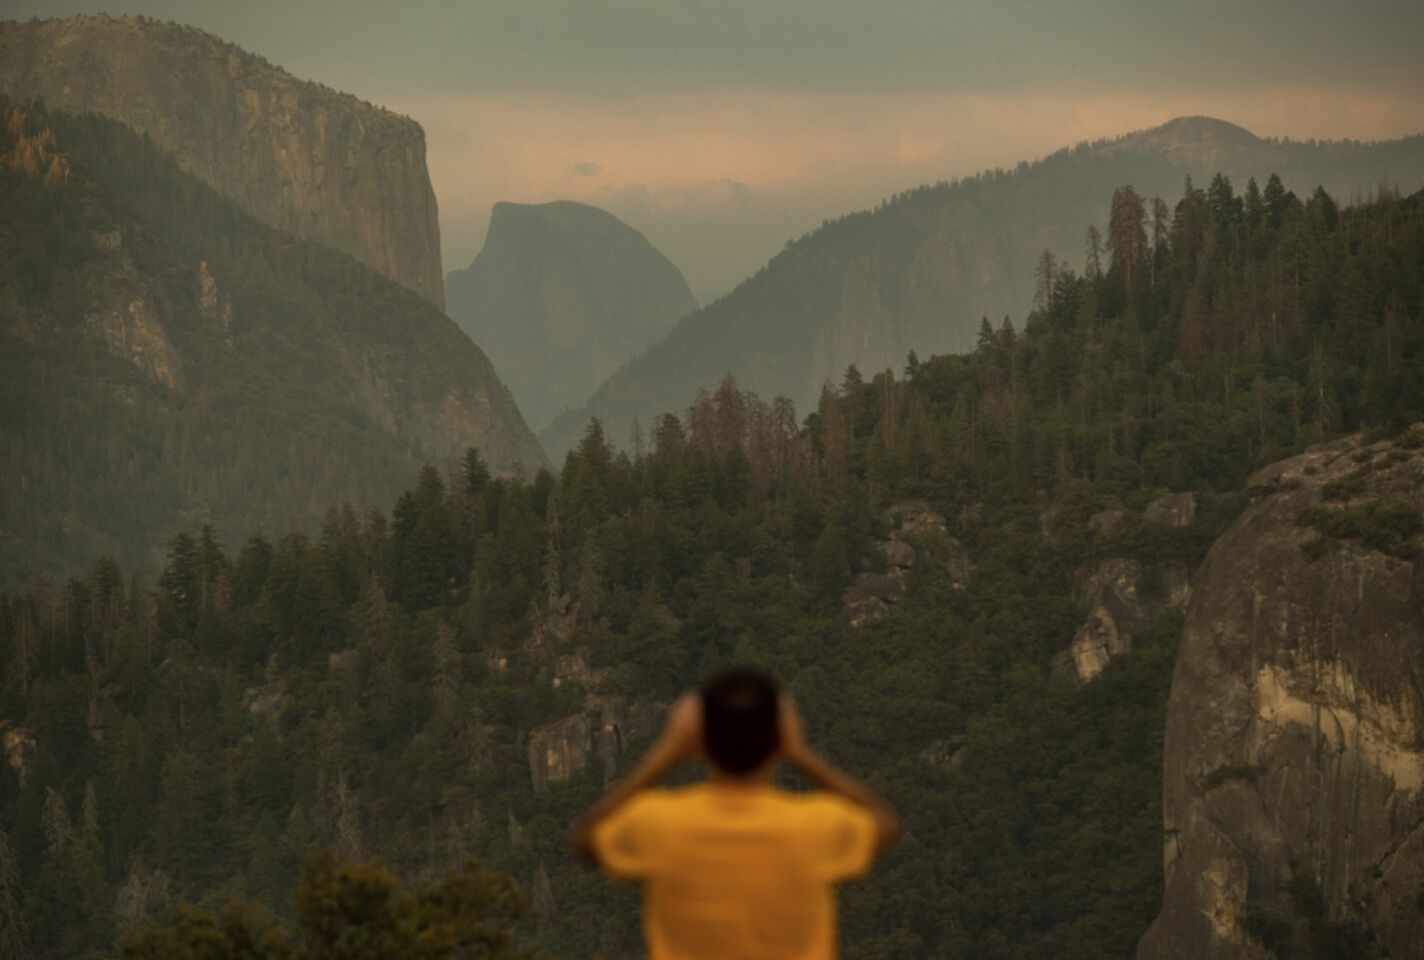 Francisco Avendano, visiting from Madrid, photographs Half Dome as smoke from the Ferguson fire hangs over Yosemite National Park. Parts of the park, including Yosemite Valley, will close Wednesday as firefighters work to contain the blaze.